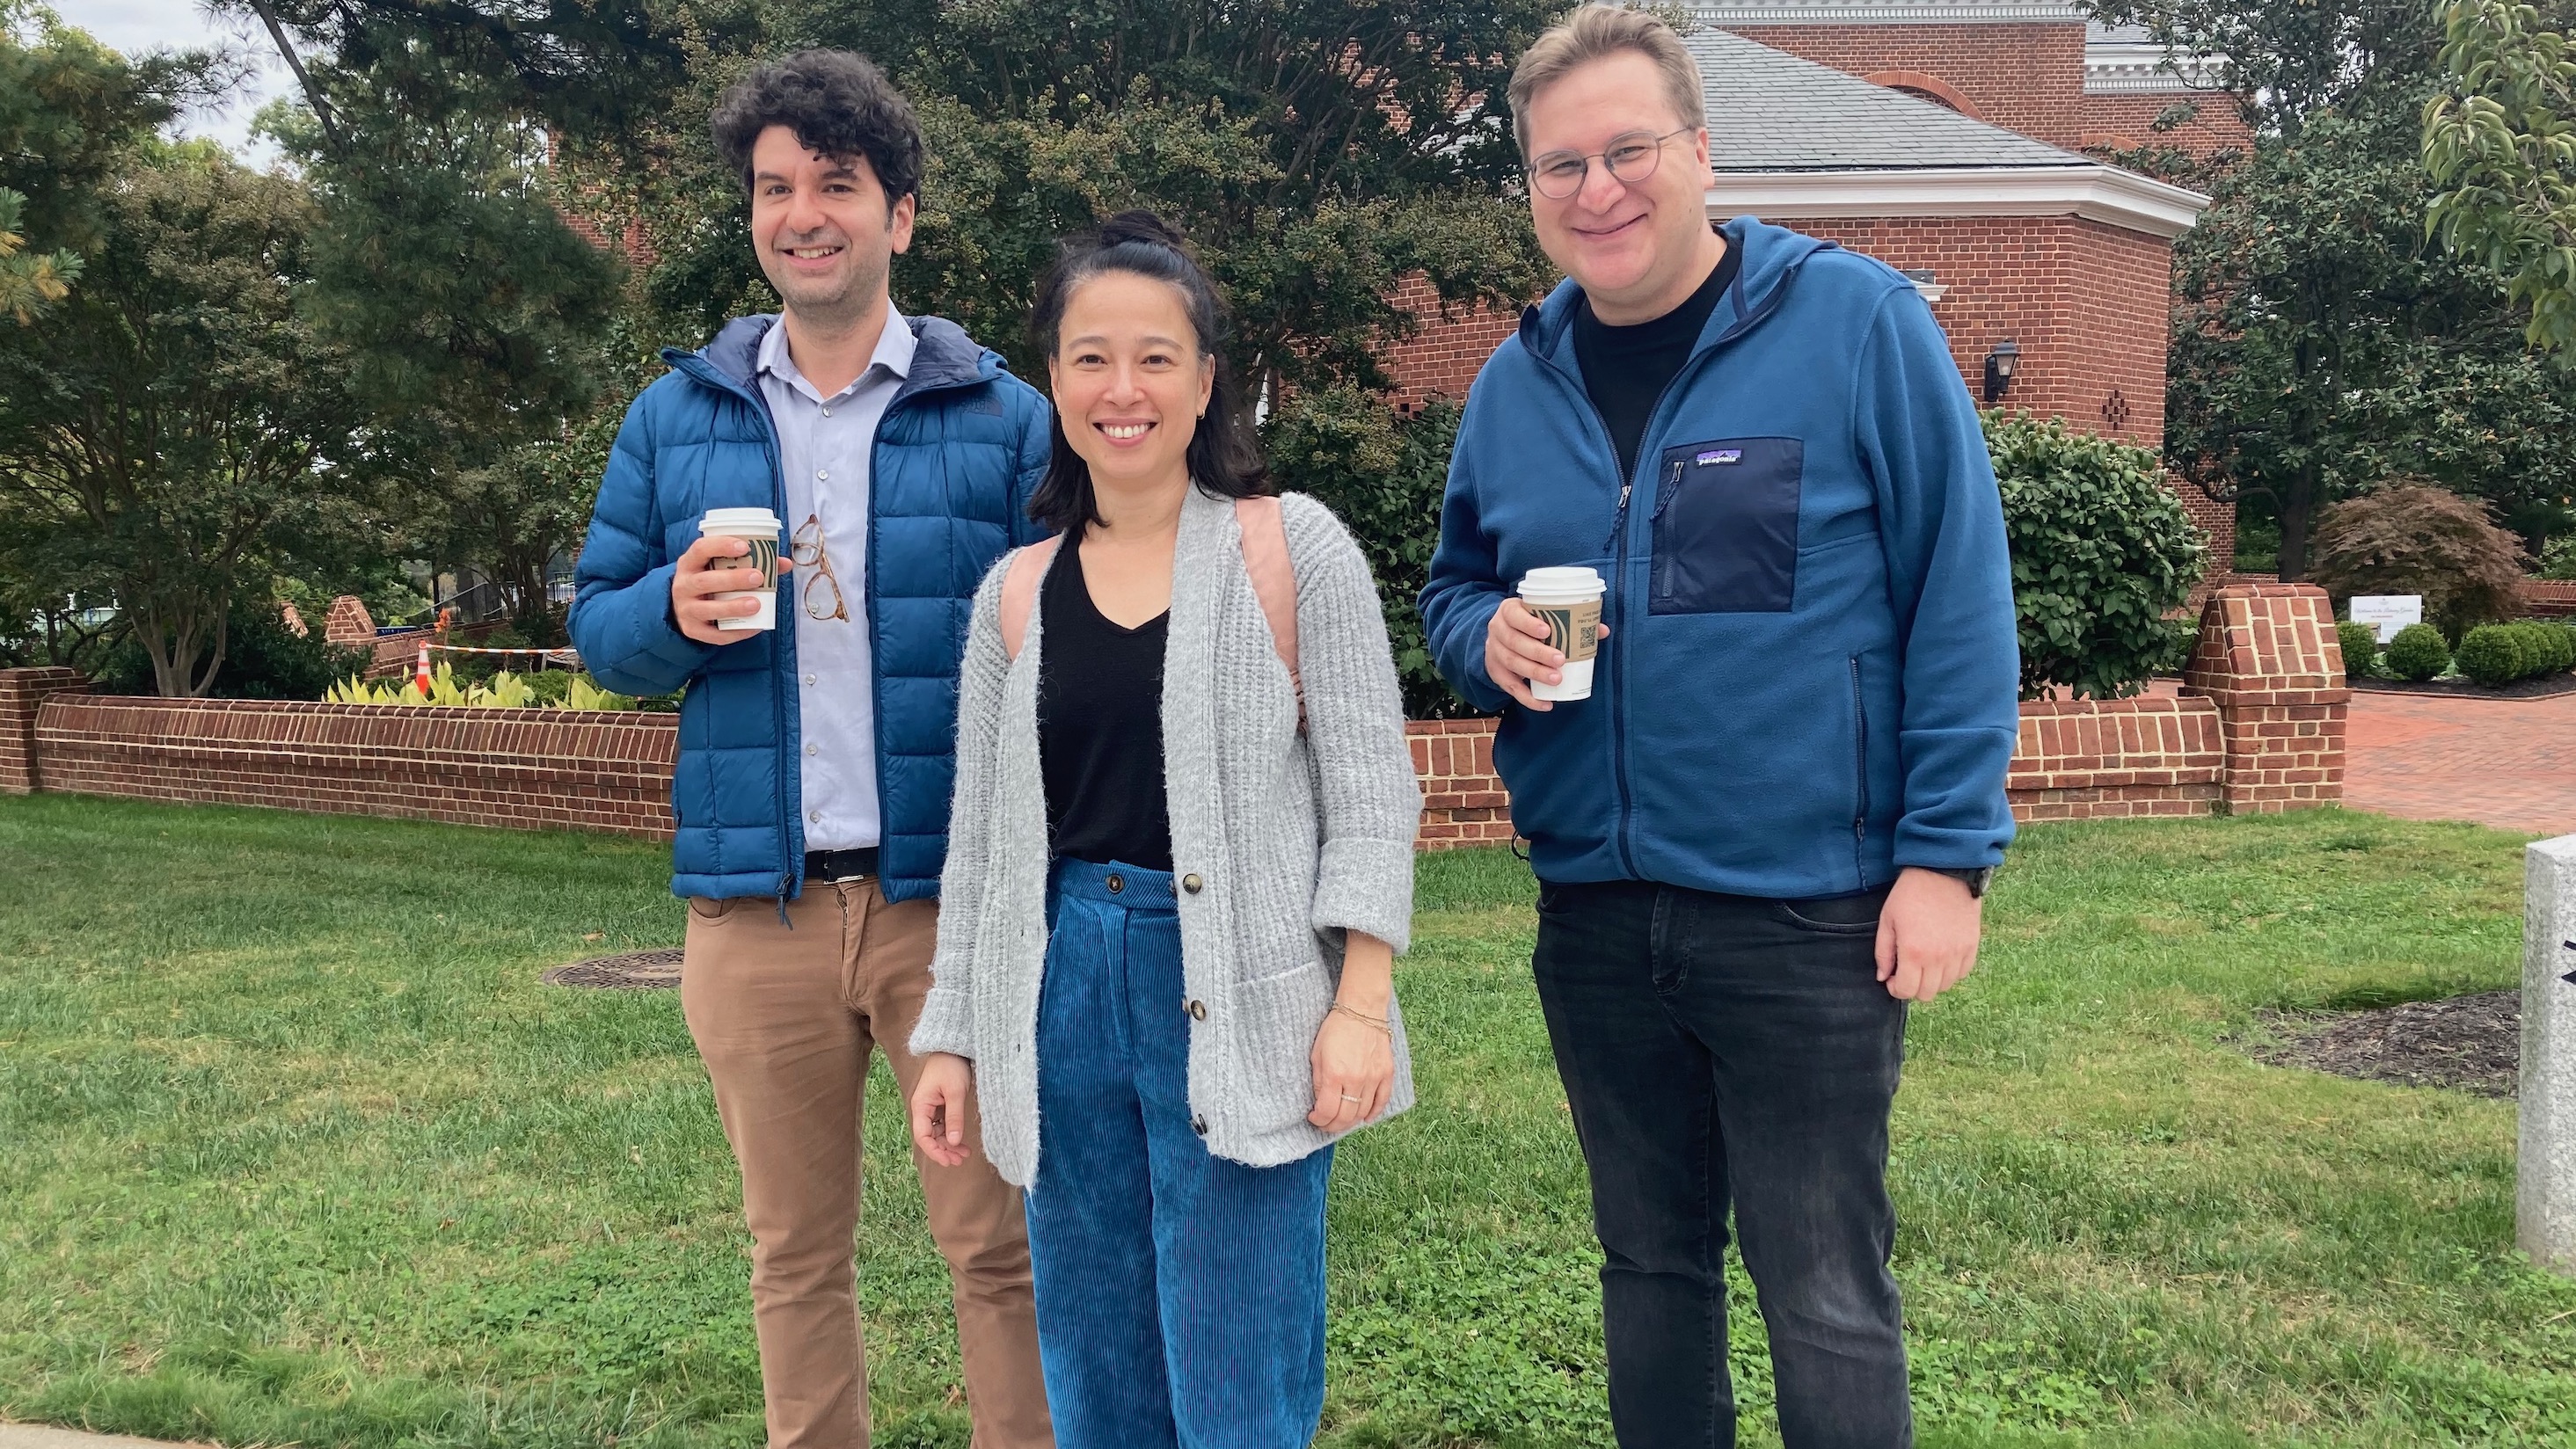 Two men and a woman standing outside posing, the two men in blue fleeces and holding coffee cups, flanking a woman wearing corduroy pants in exactly the same shade of blue.